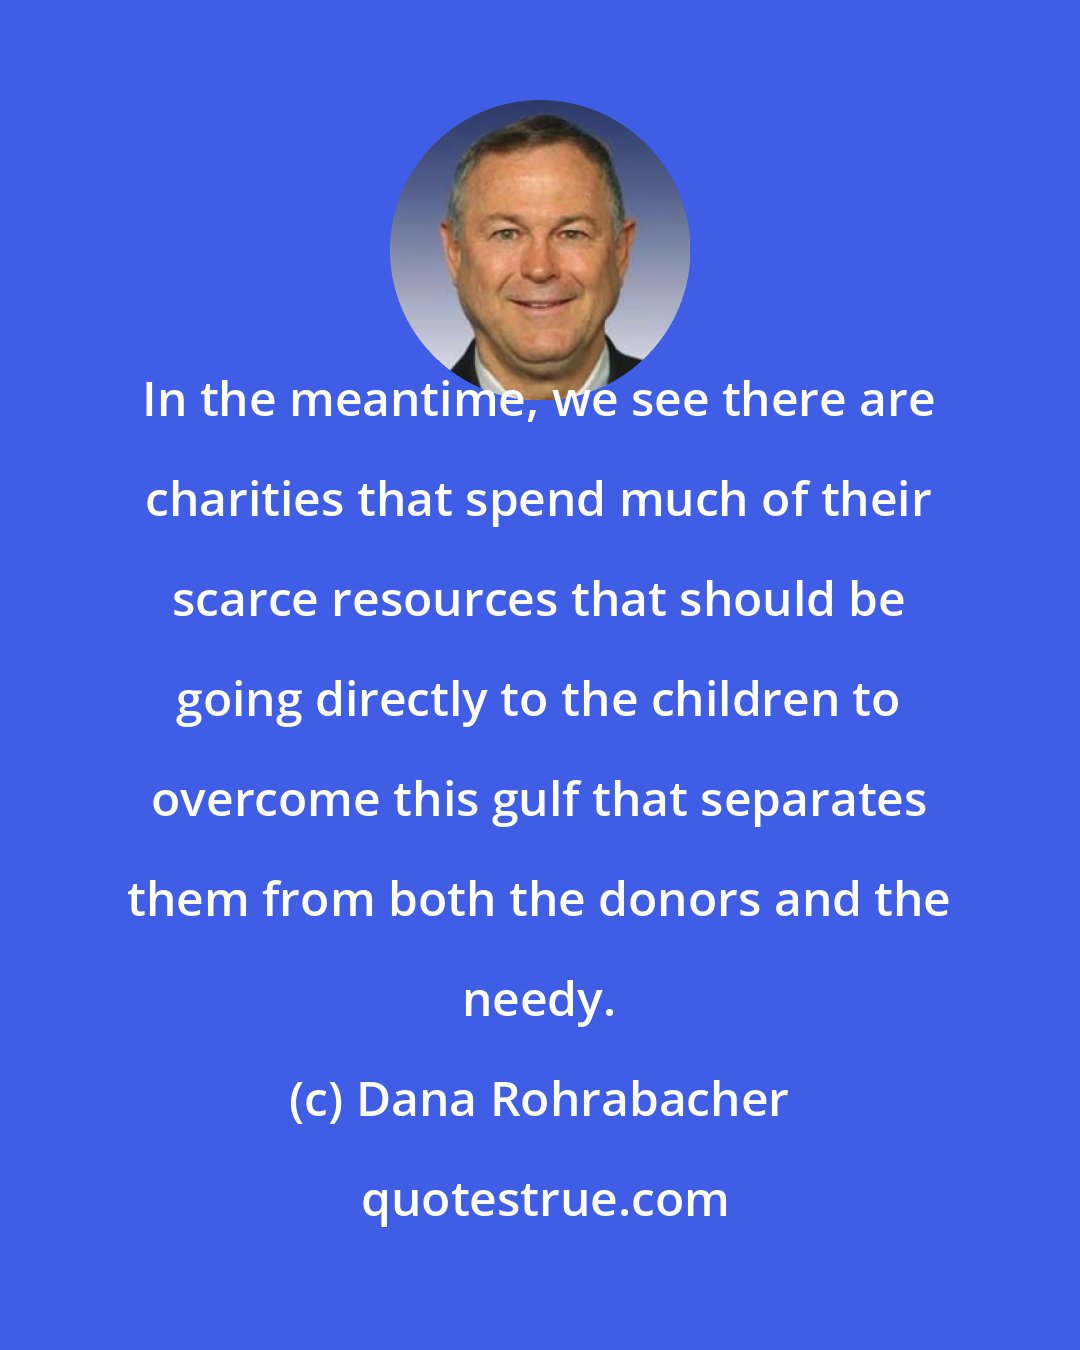 Dana Rohrabacher: In the meantime, we see there are charities that spend much of their scarce resources that should be going directly to the children to overcome this gulf that separates them from both the donors and the needy.